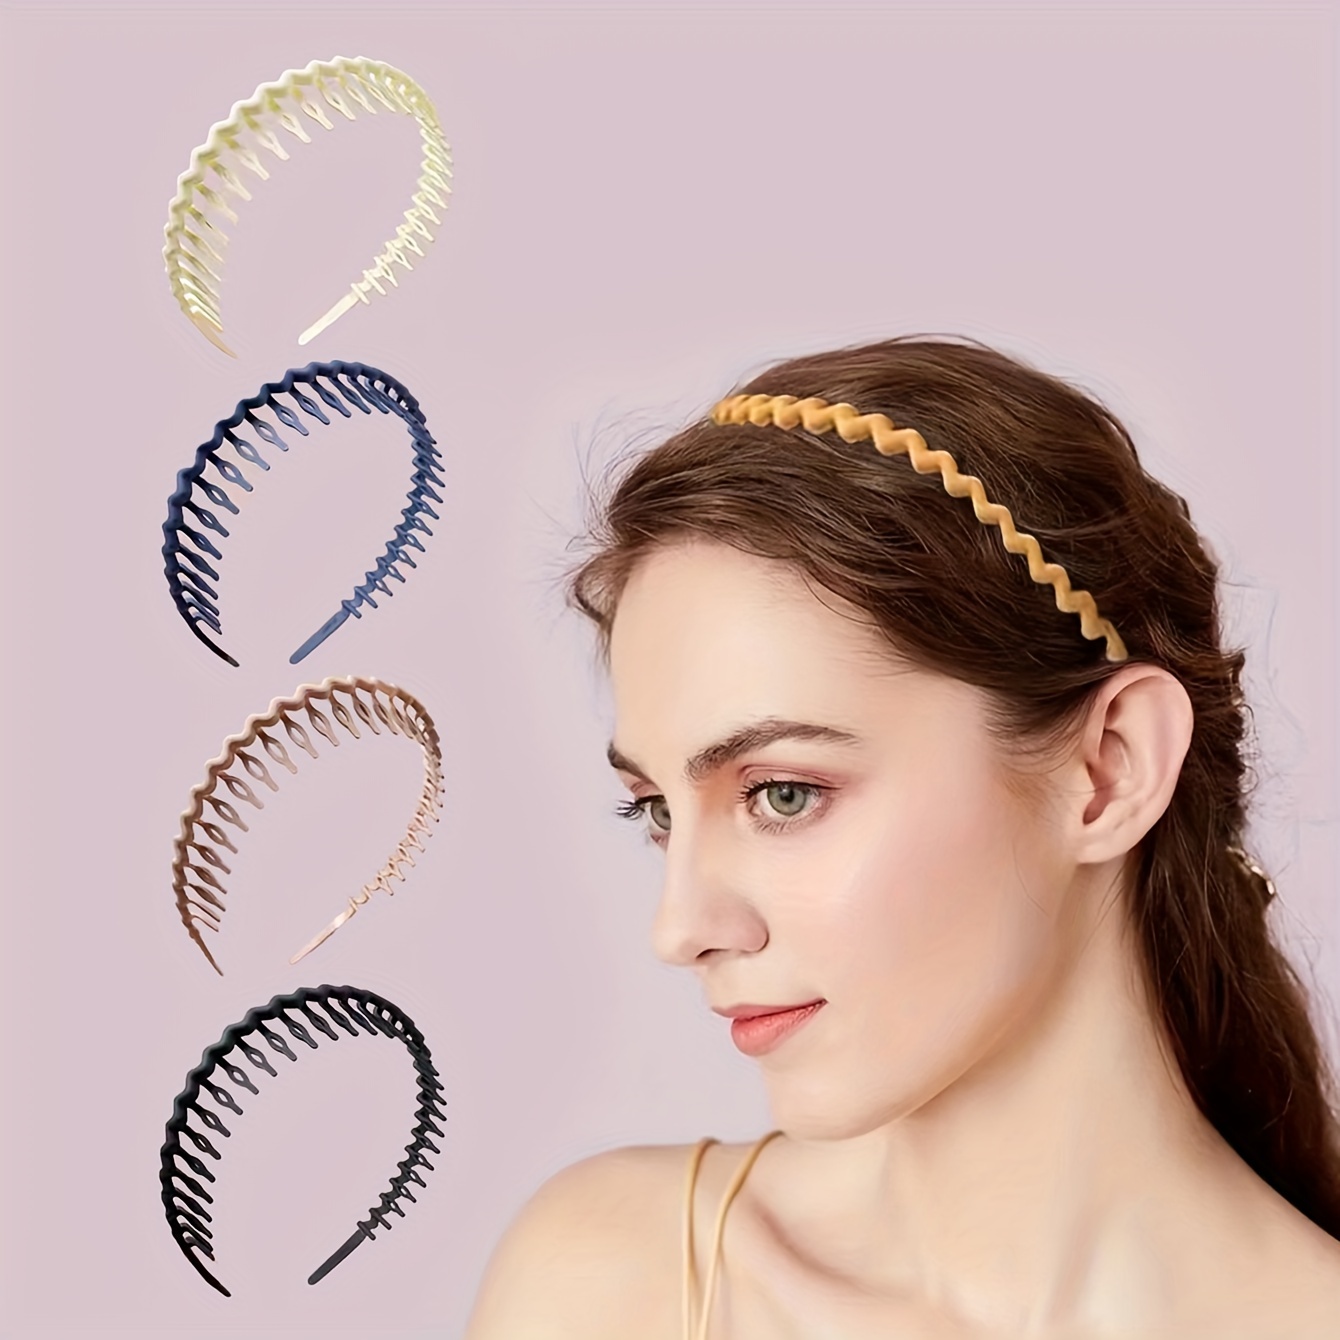 Head Bands No Slip Fashion for Women Girls Cute Soft Fabric Candy Color  Headband Hair Accessories